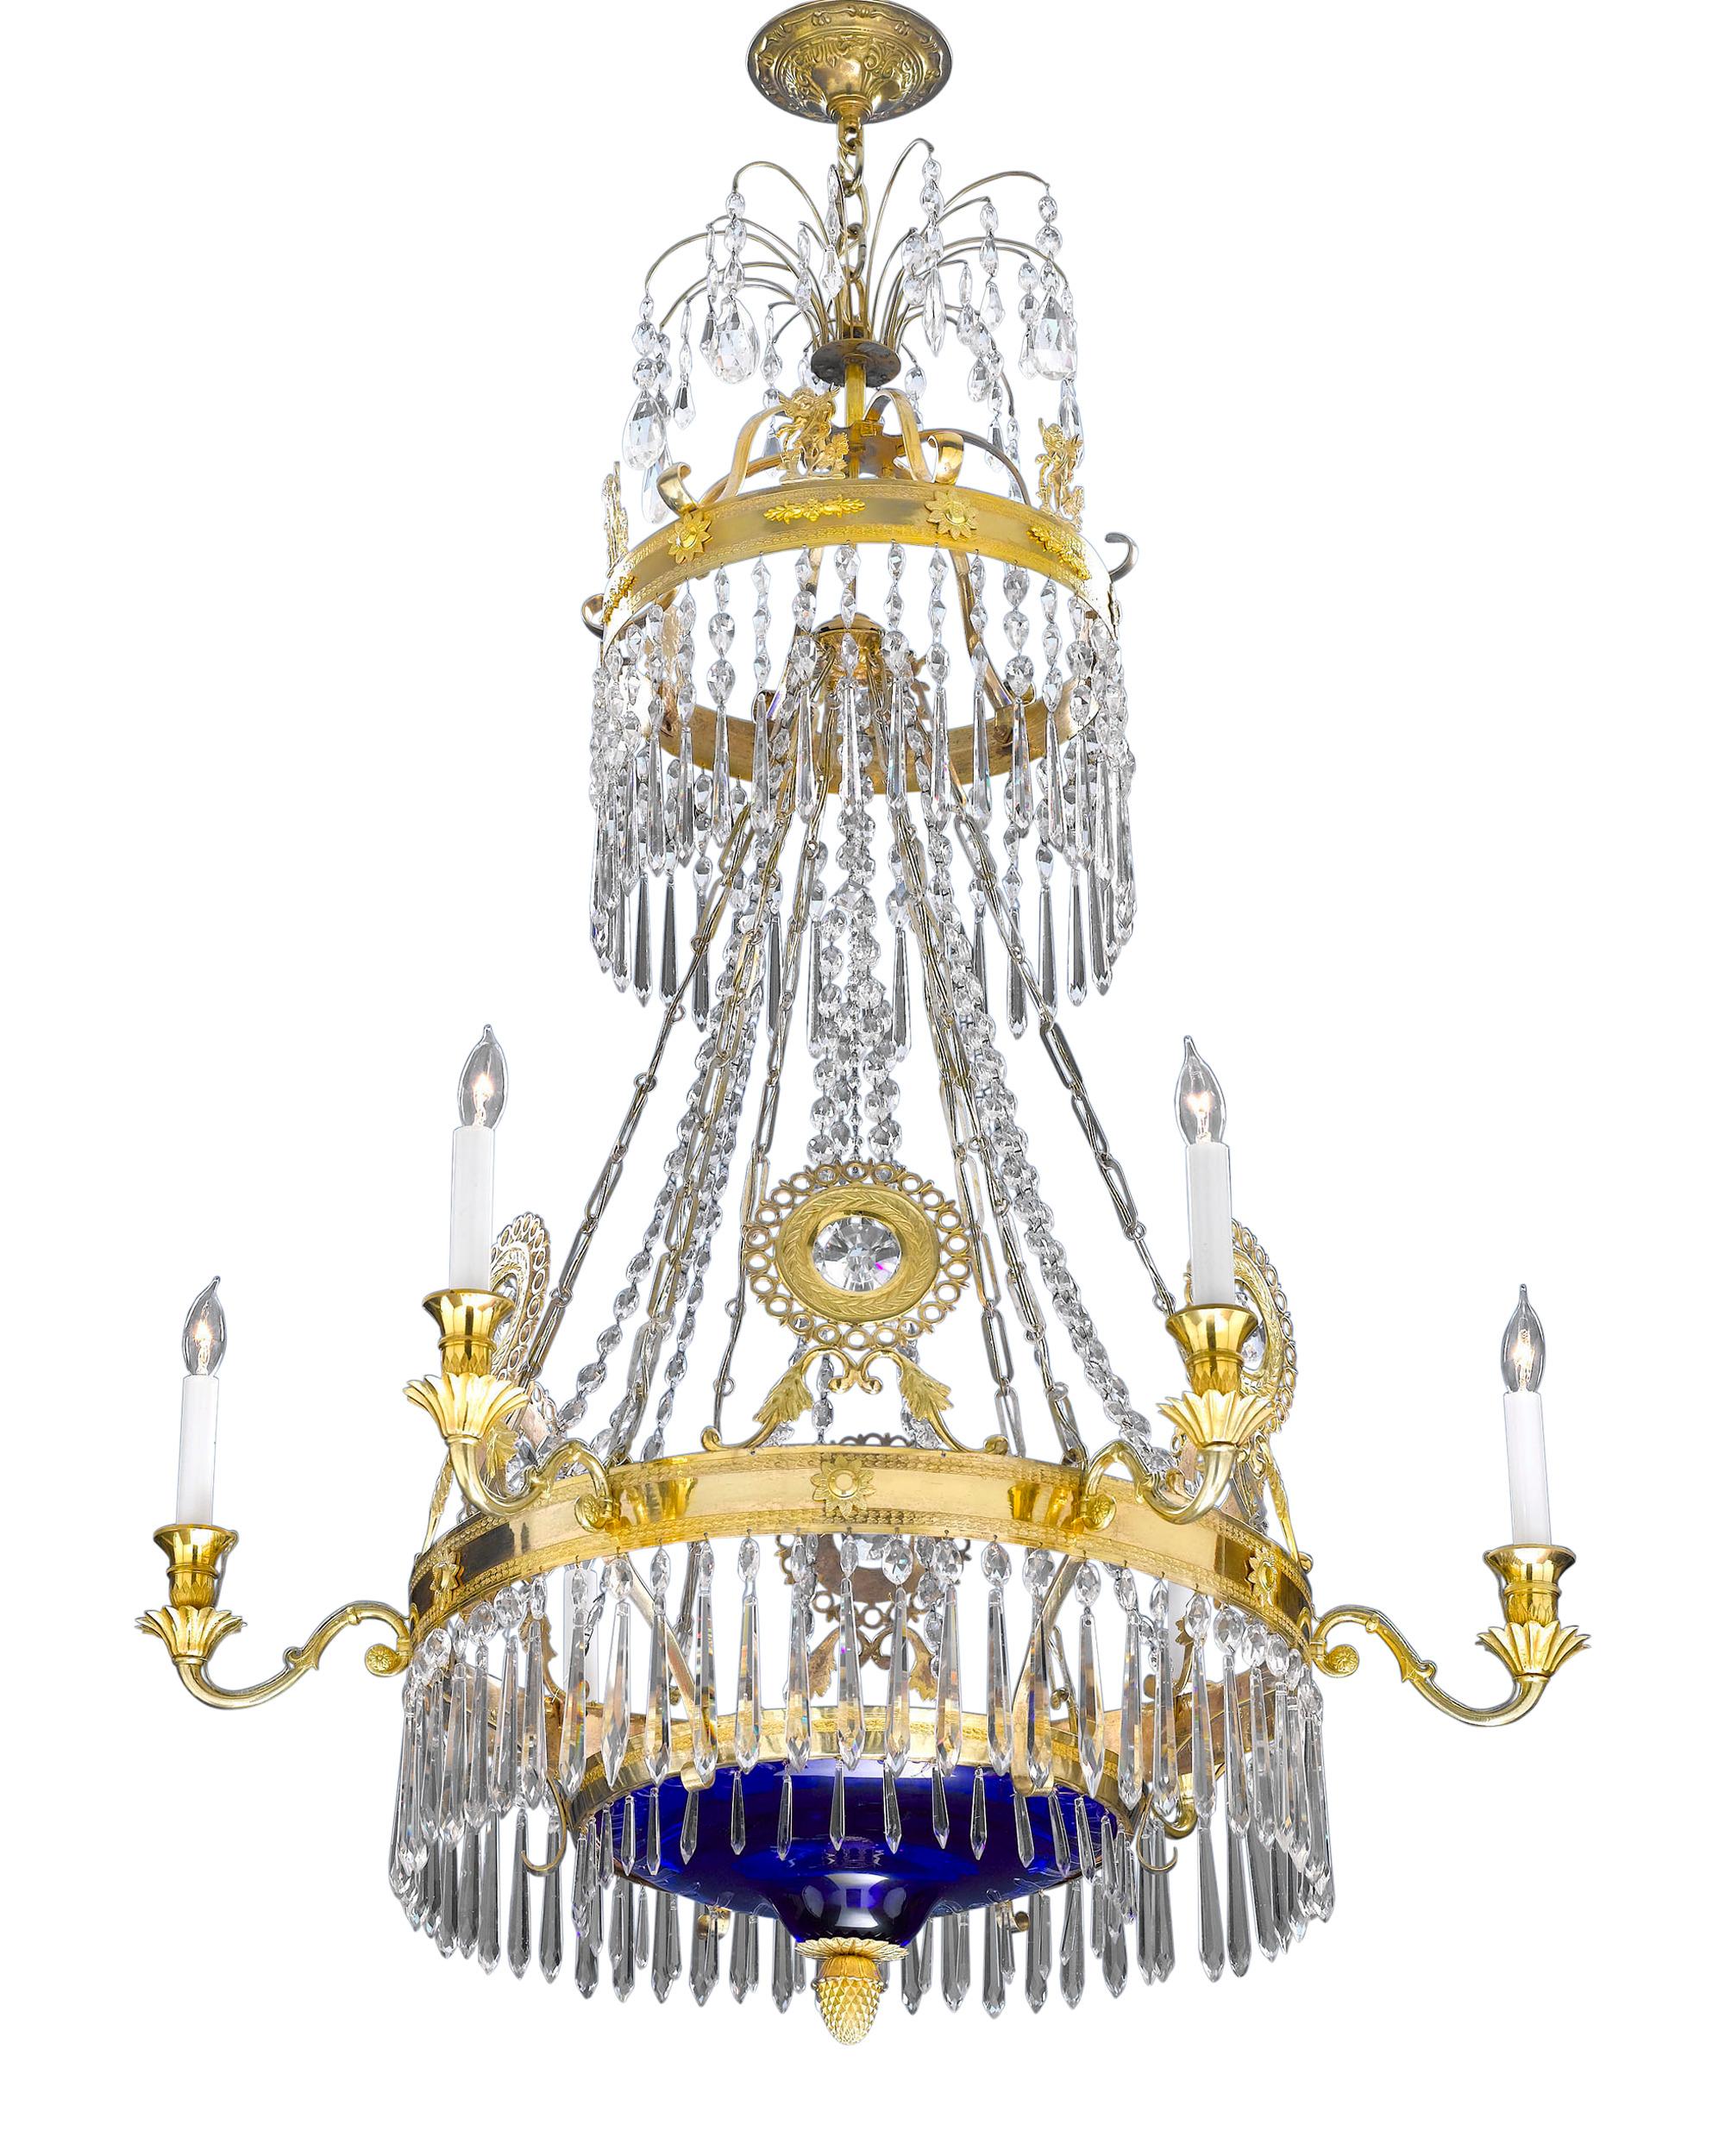 This Russian chandelier is distinguished by its exceptional rarity. The entirety of this important Neoclassical fixture is covered with a myriad of intricately cut glass lusters, all suspended from branches of hand-crafted ormolu. An elegant cobalt